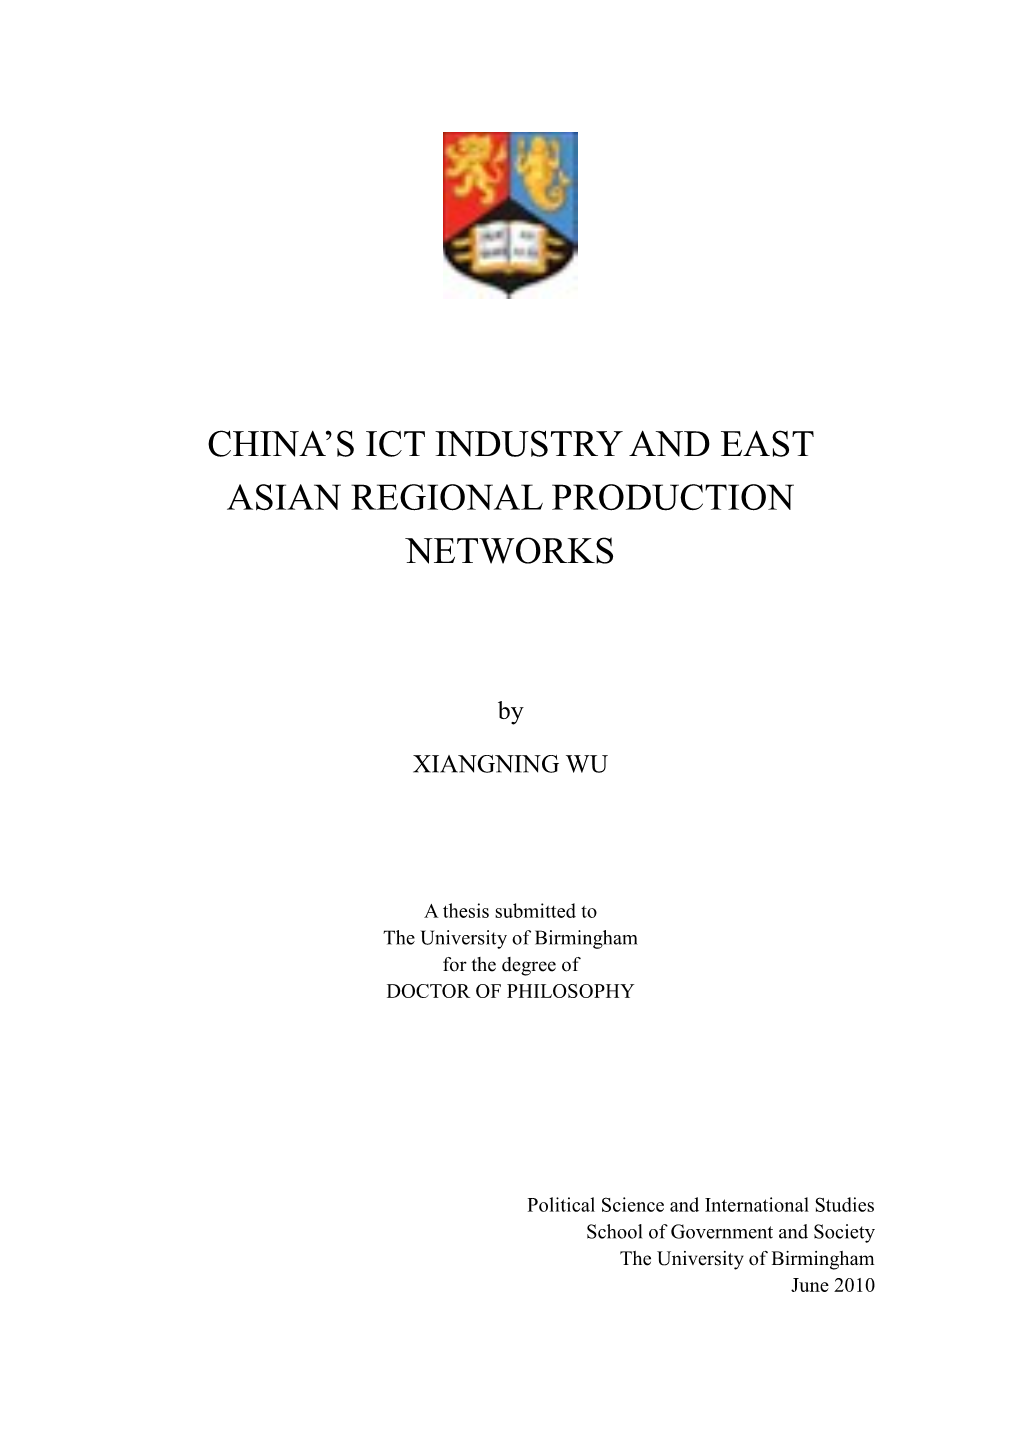 China's ICT Industry and East Asian Regional Production Networks